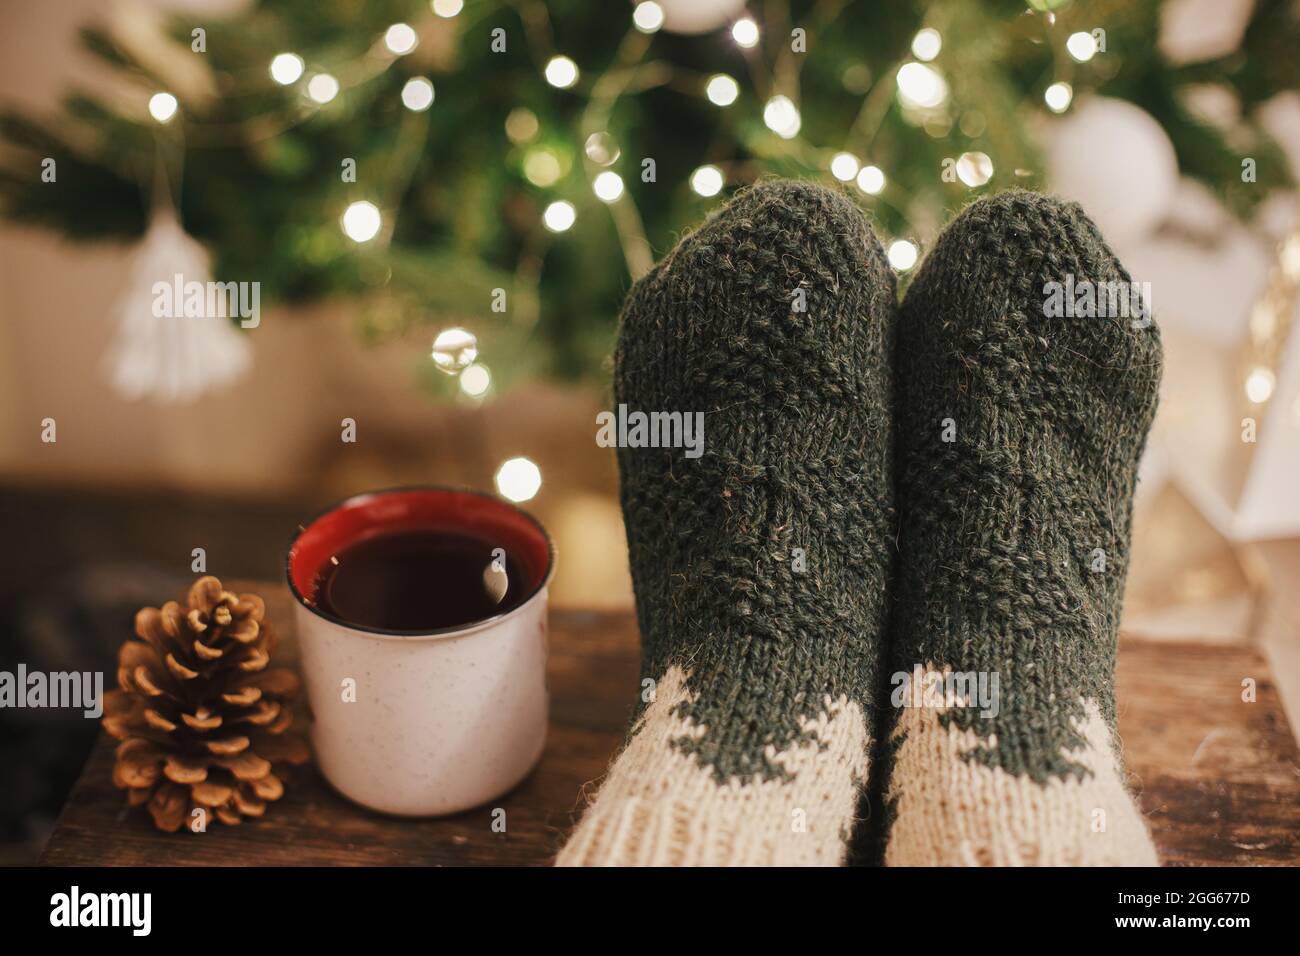 Cozy winter moments at home. Woman feet in cozy woolen socks and cup of warm tea on background of christmas tree in lights in festive evening room. St Stock Photo